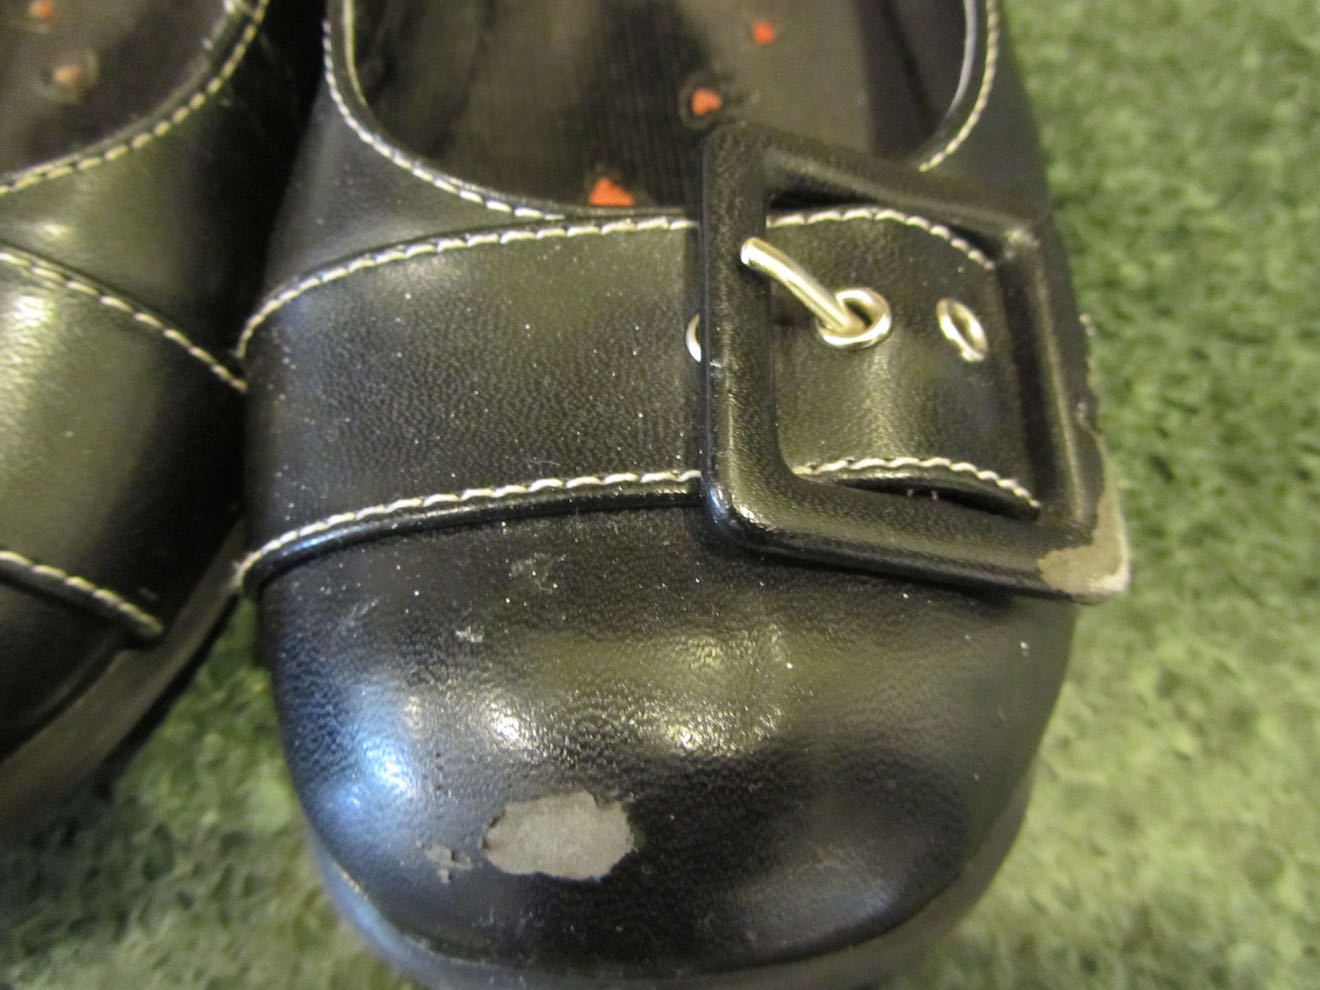 creative savv: Repairing damaged surface of faux leather shoes